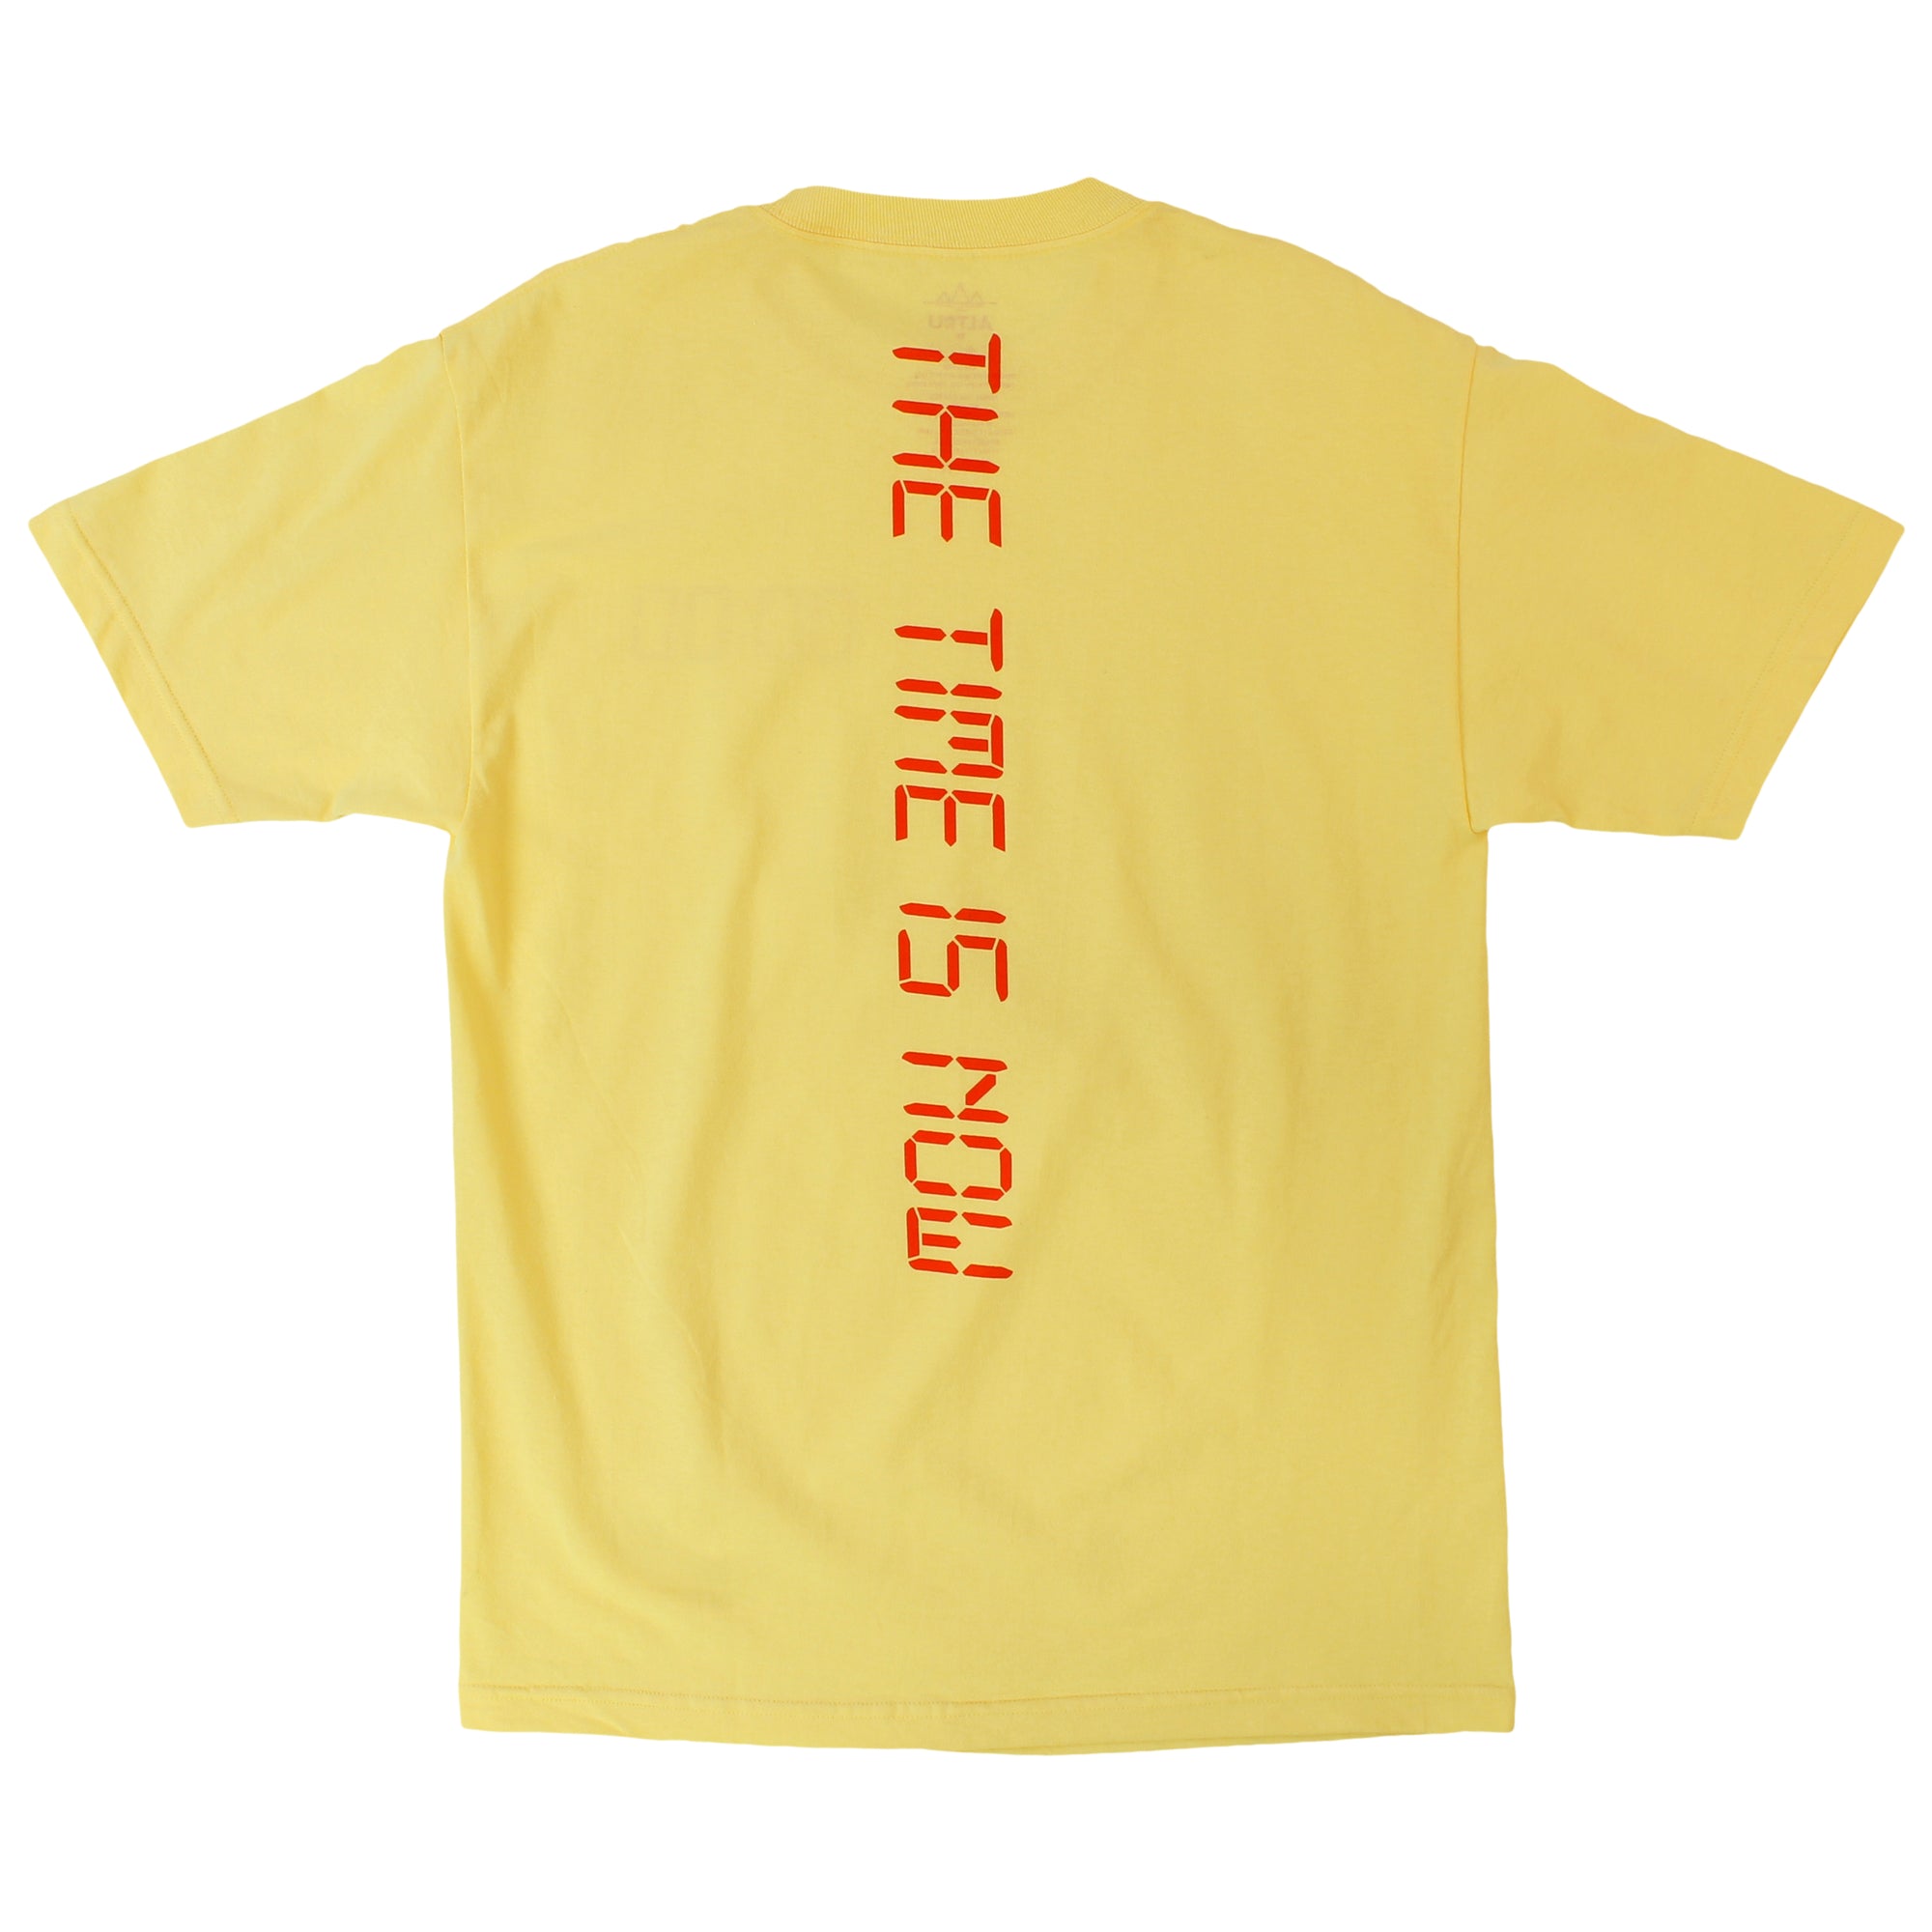 The Time Is Now yellow graphic tee by Altru Apparel front